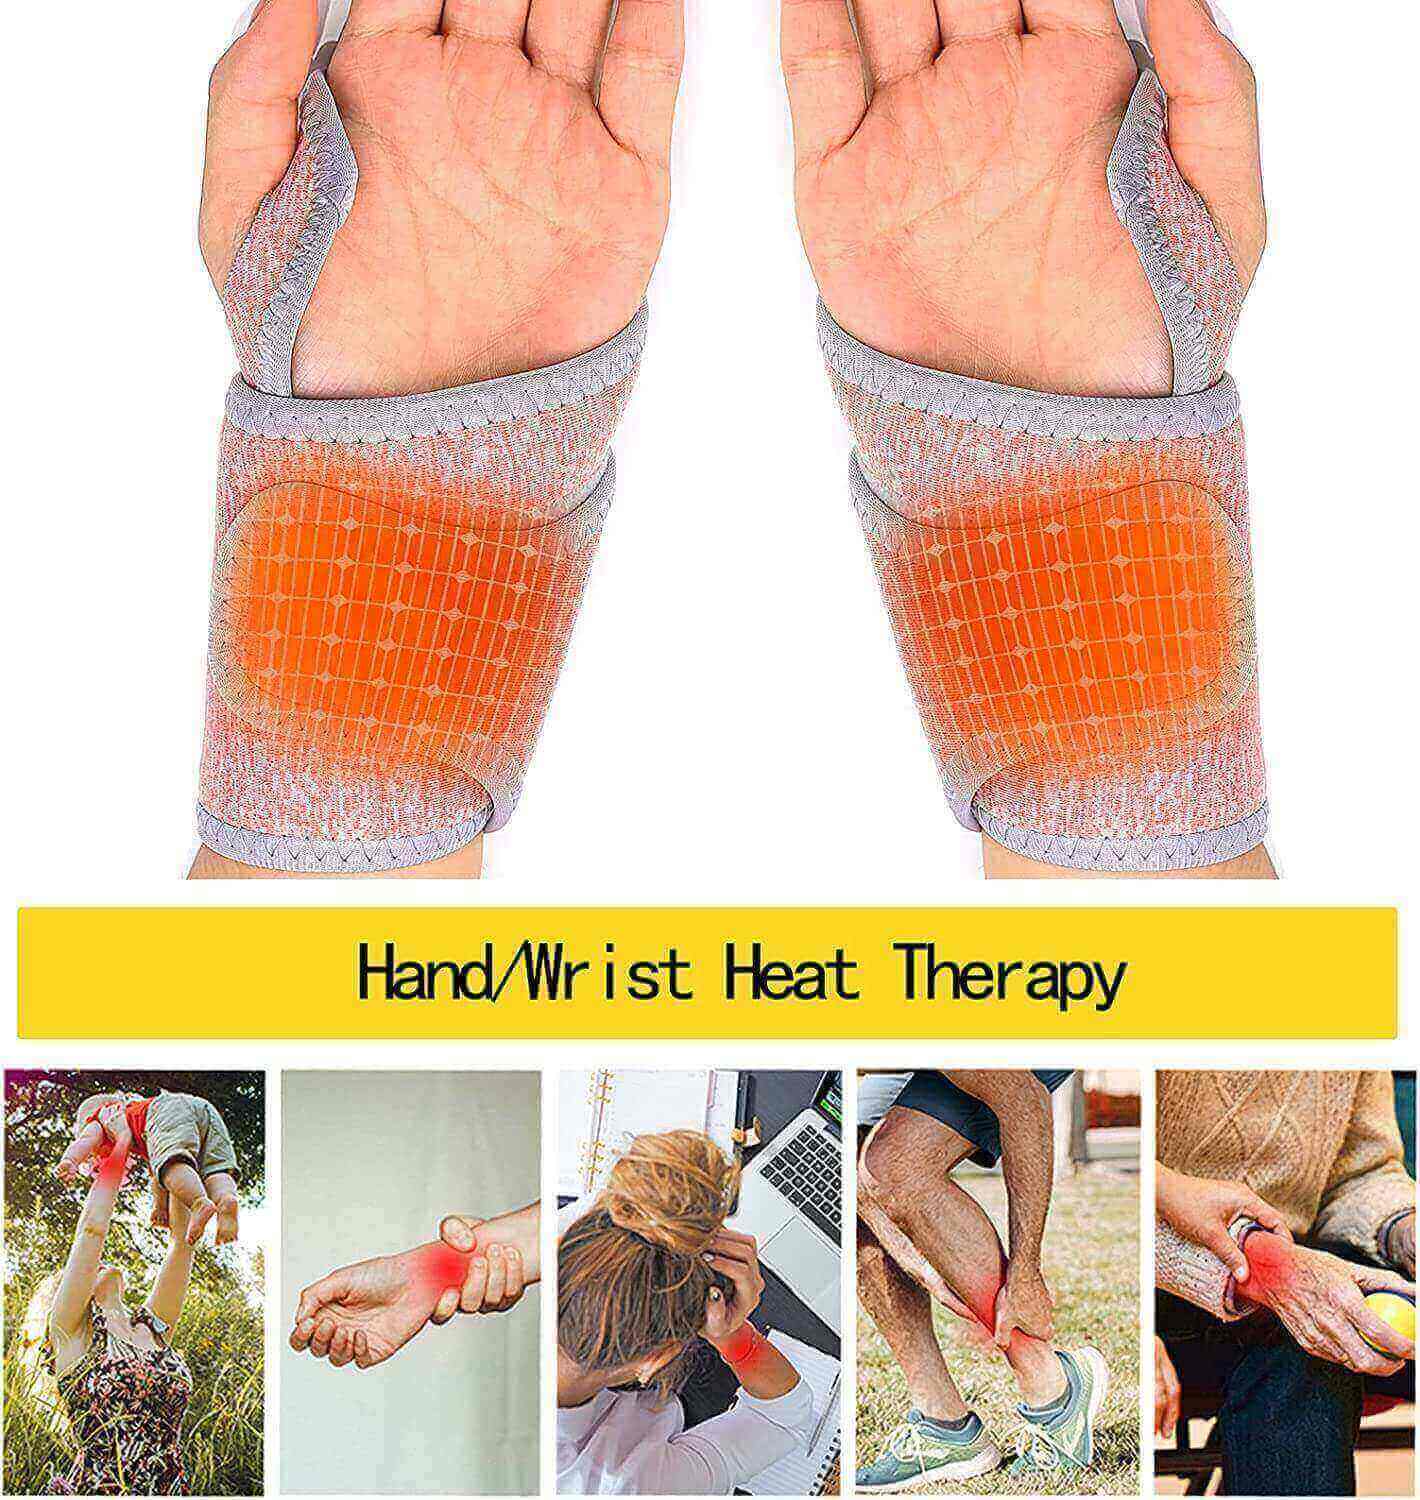 2 Electric Heating Pads for Wrist & Hand, heat therapy